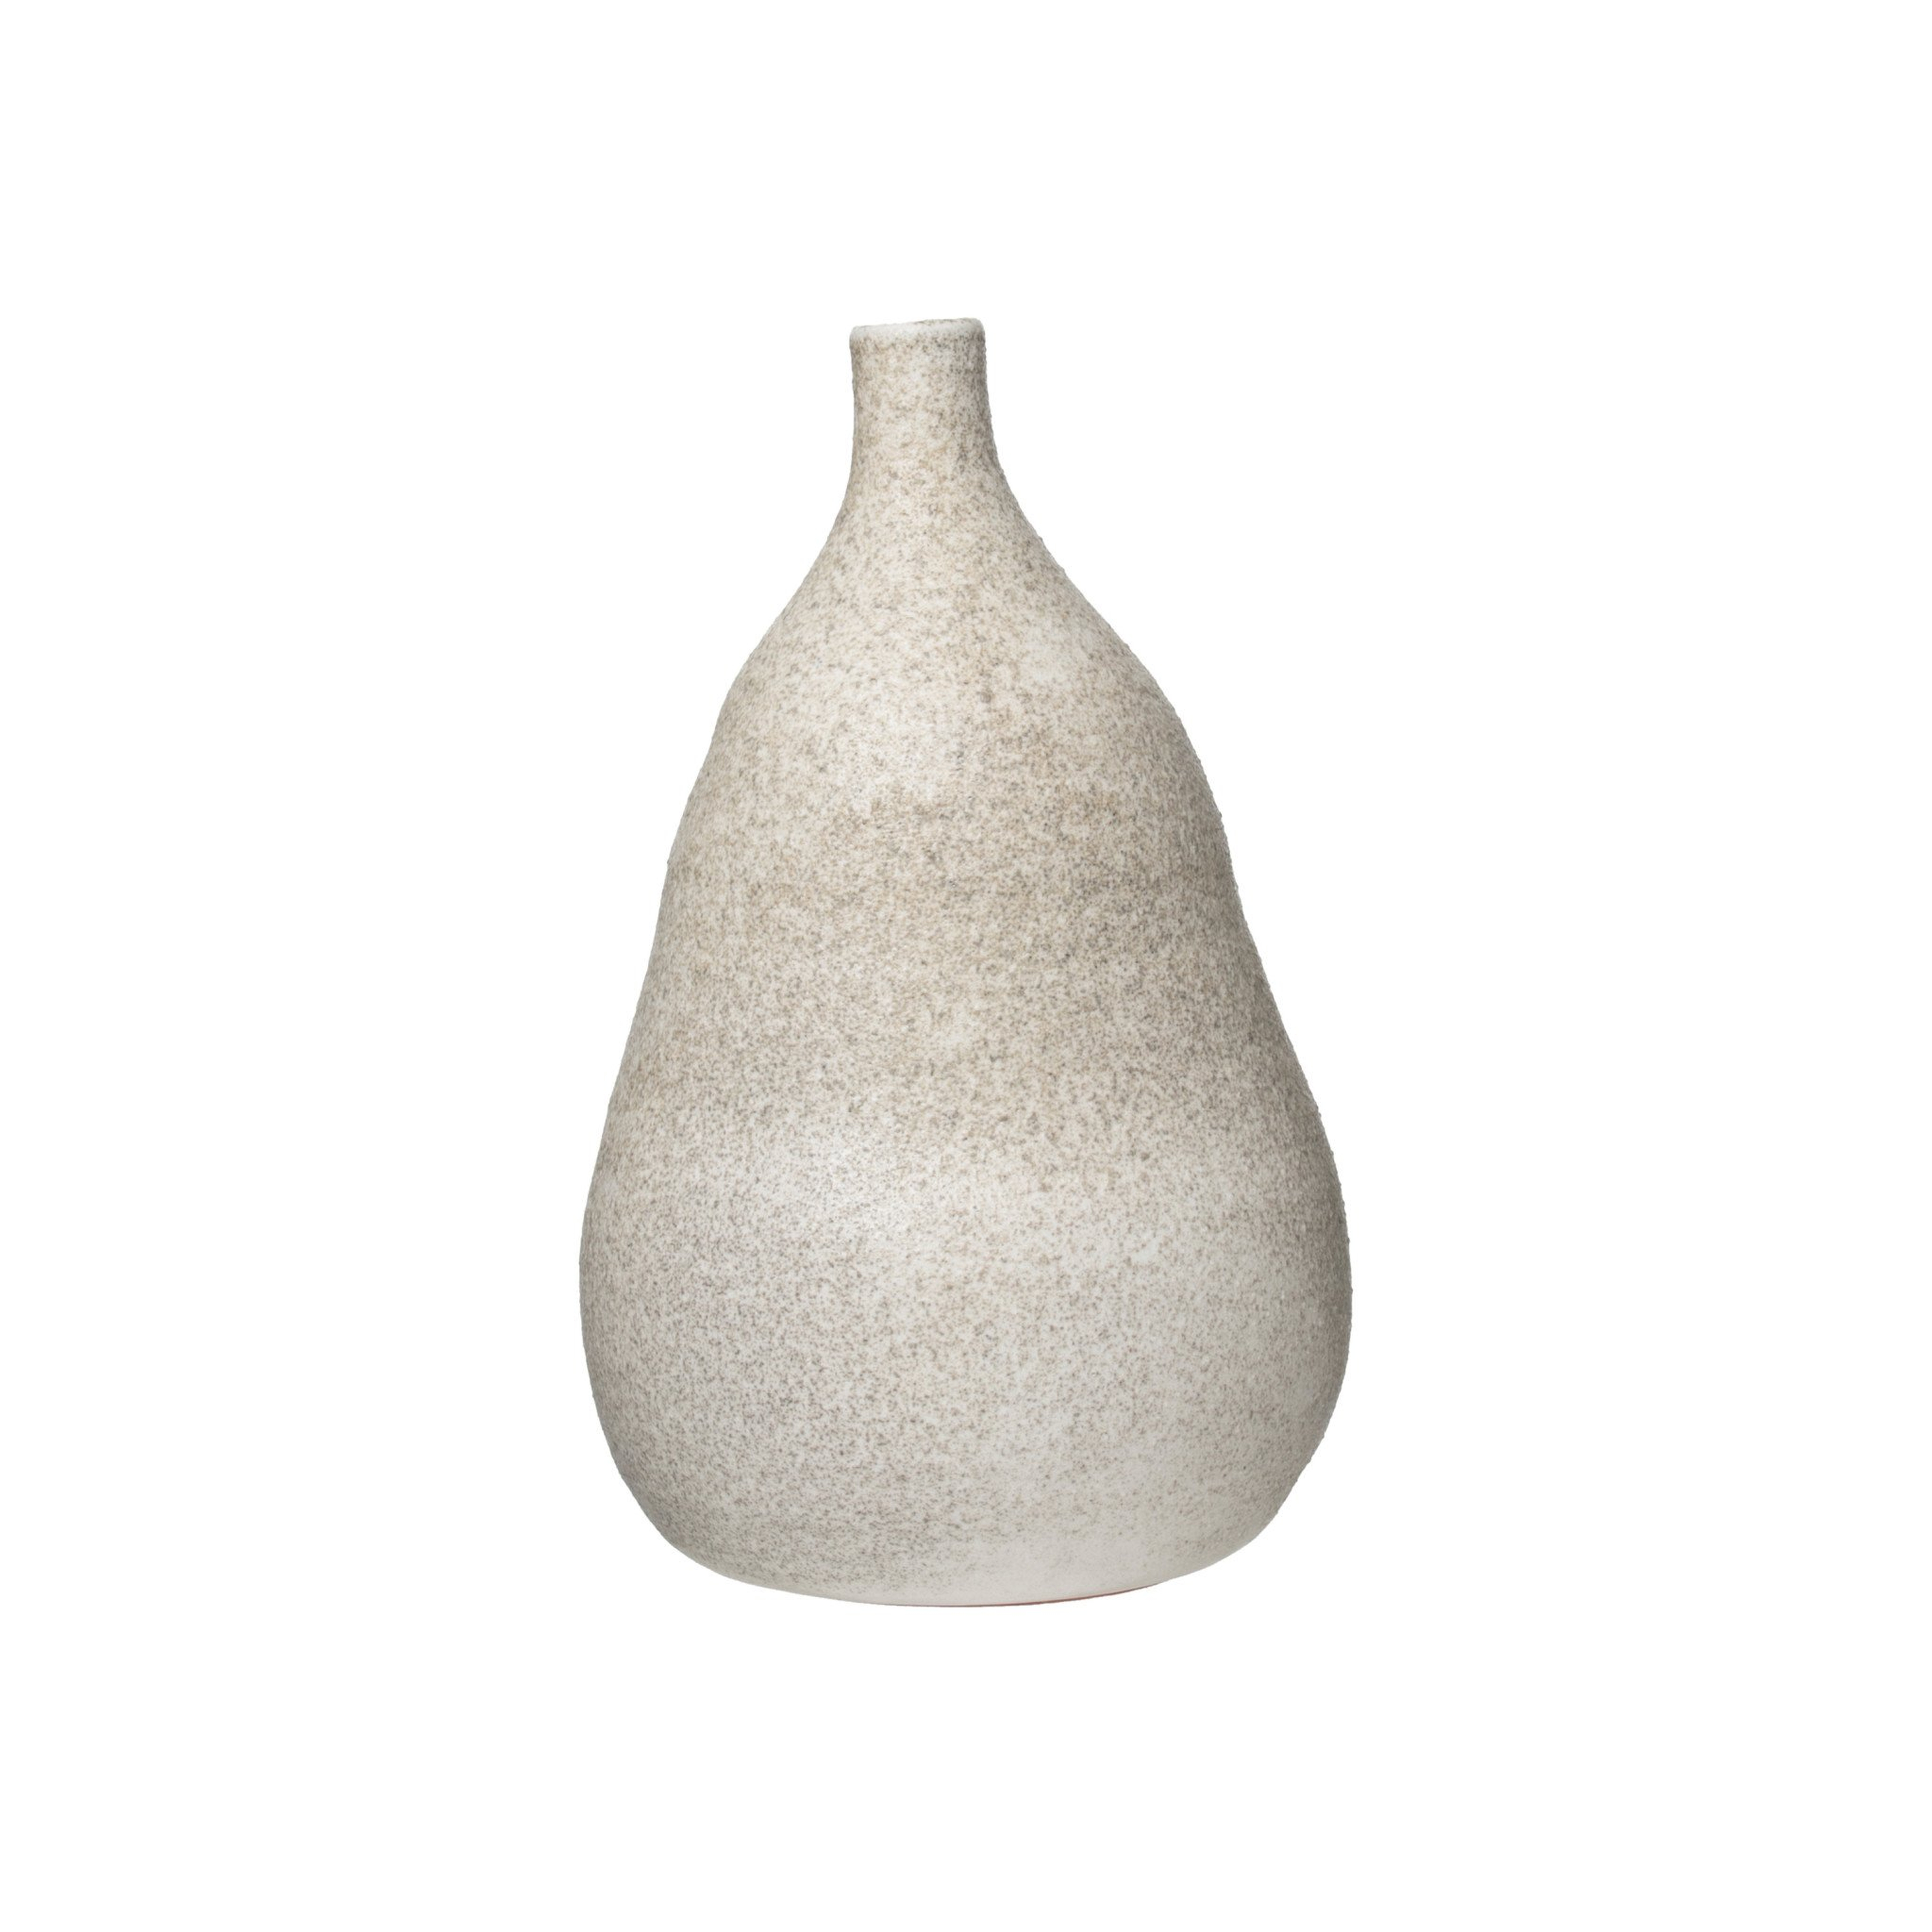 Medium Textured Terracotta Vase with Narrow Top & Distressed Finish - Nomad Home